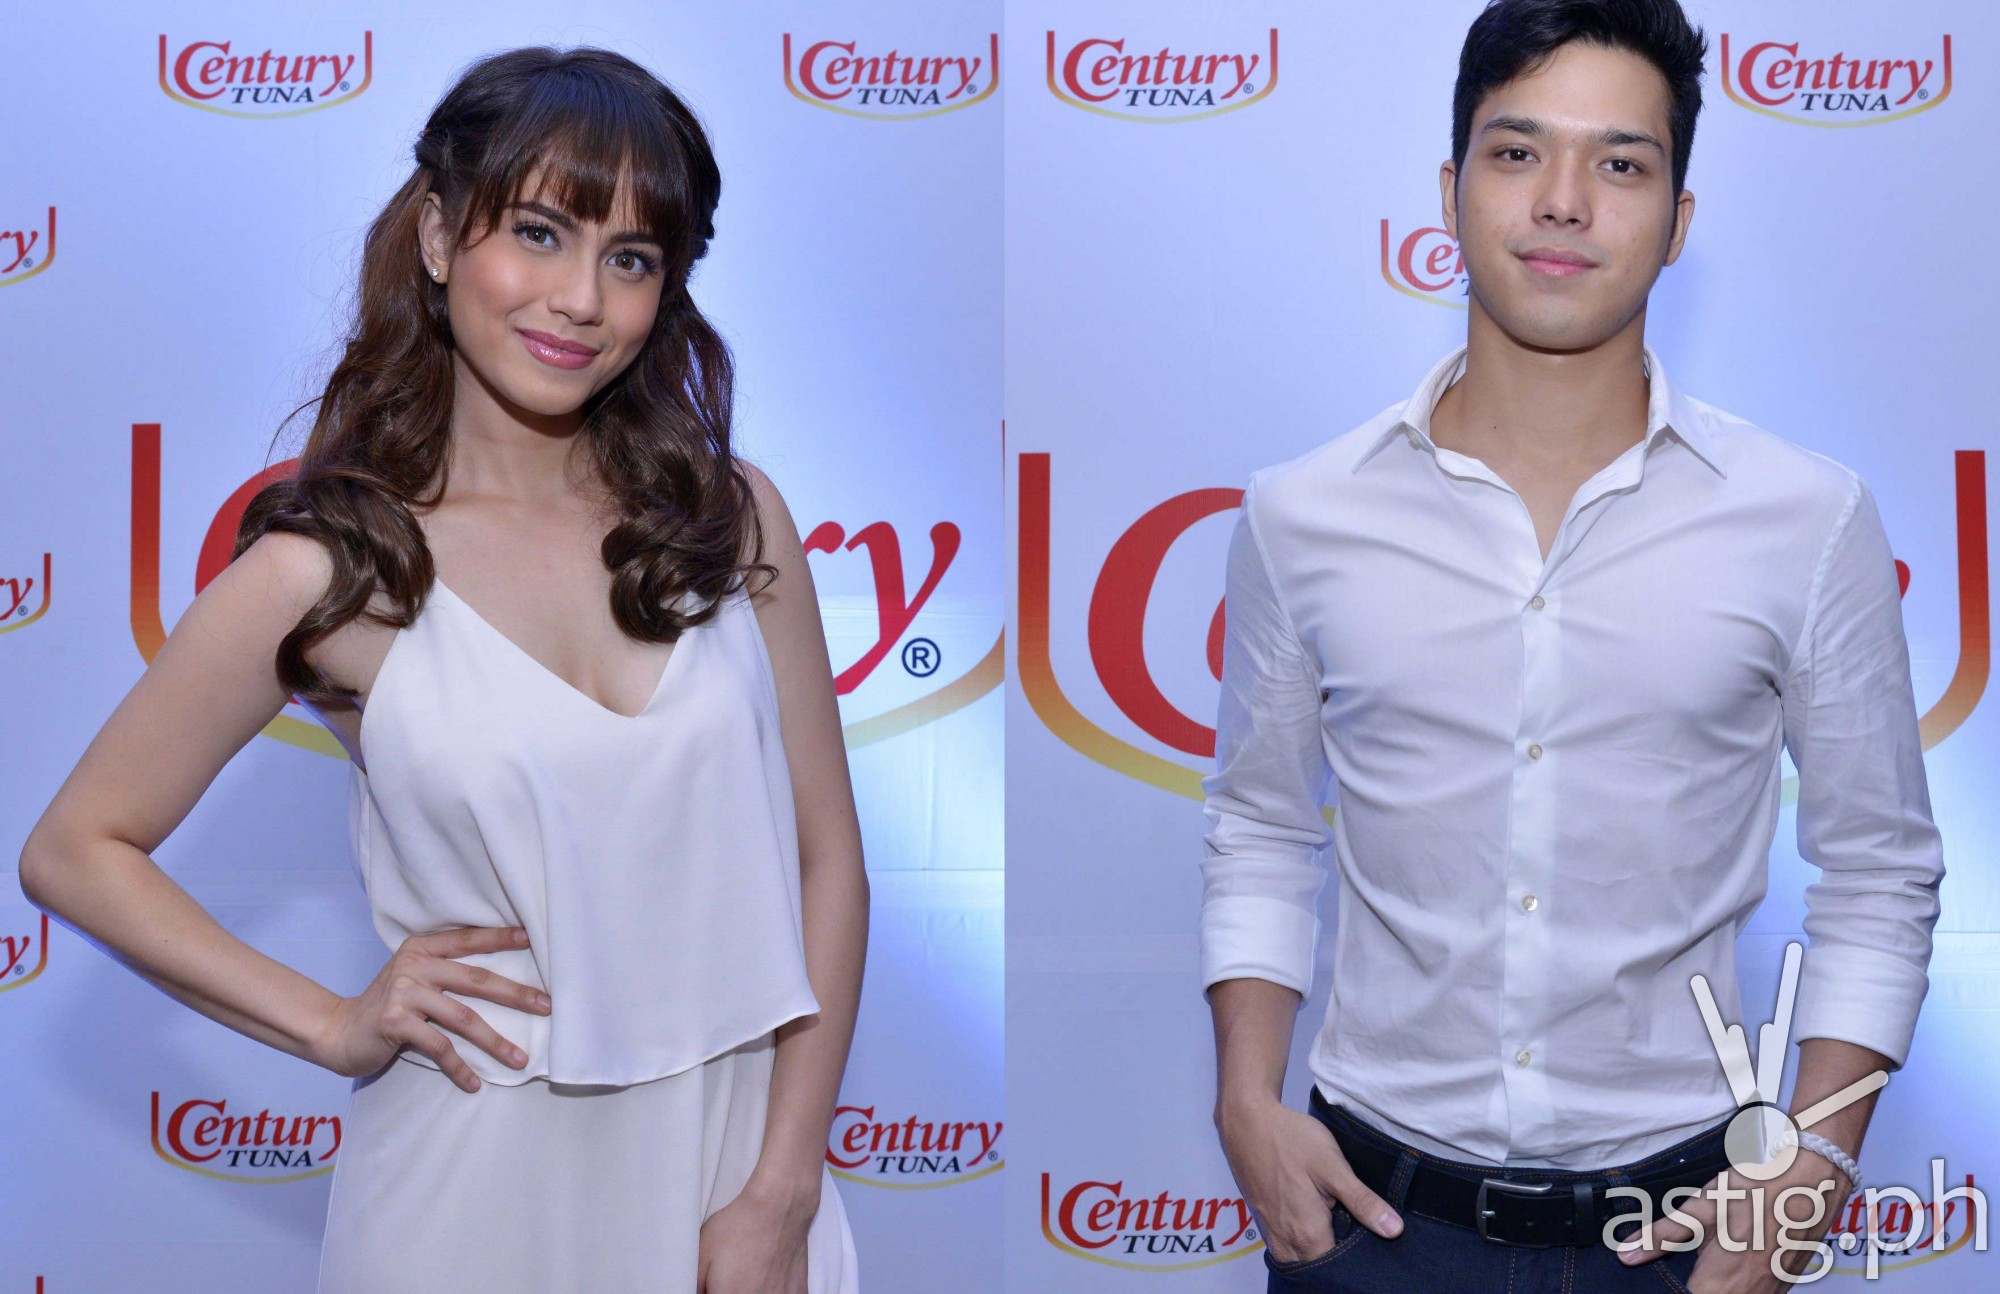 Jessy Mendiola and Elmo Magalona to grace Century Tuna Pre-Finals Weekend